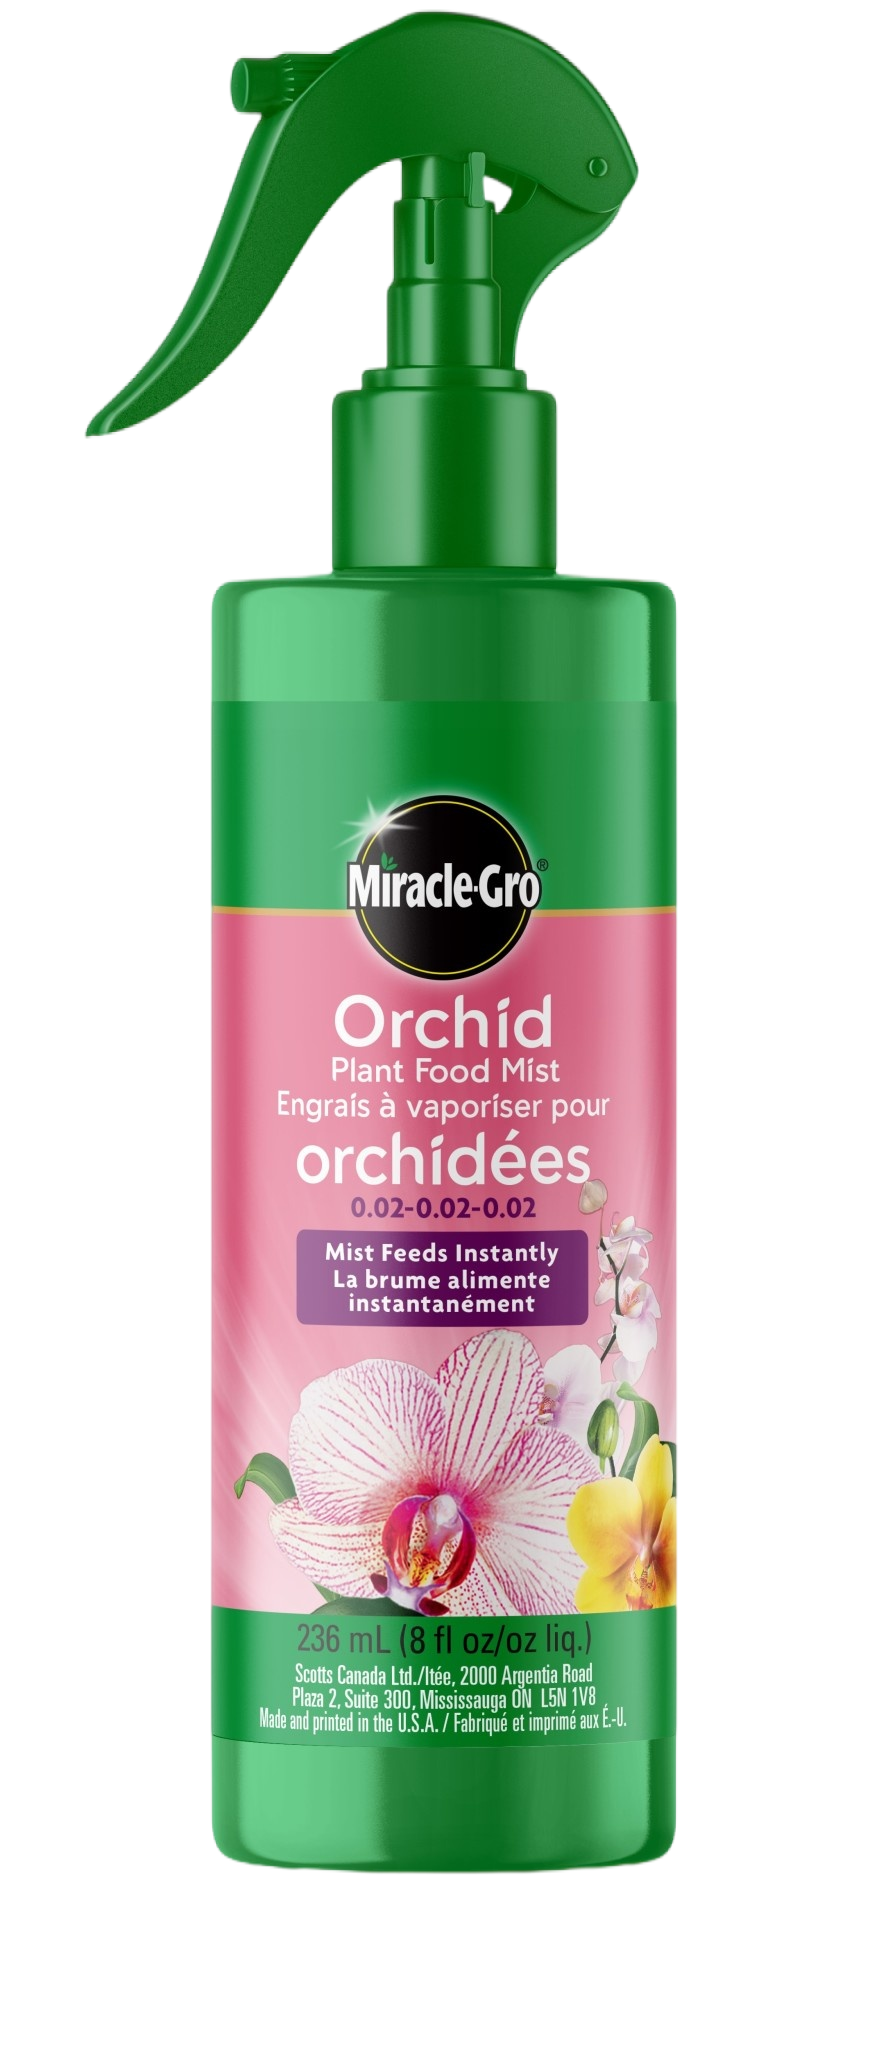 Miracle-Gro Orchid Plant Food Mist 0.02-0.02-0.02 (236mL)